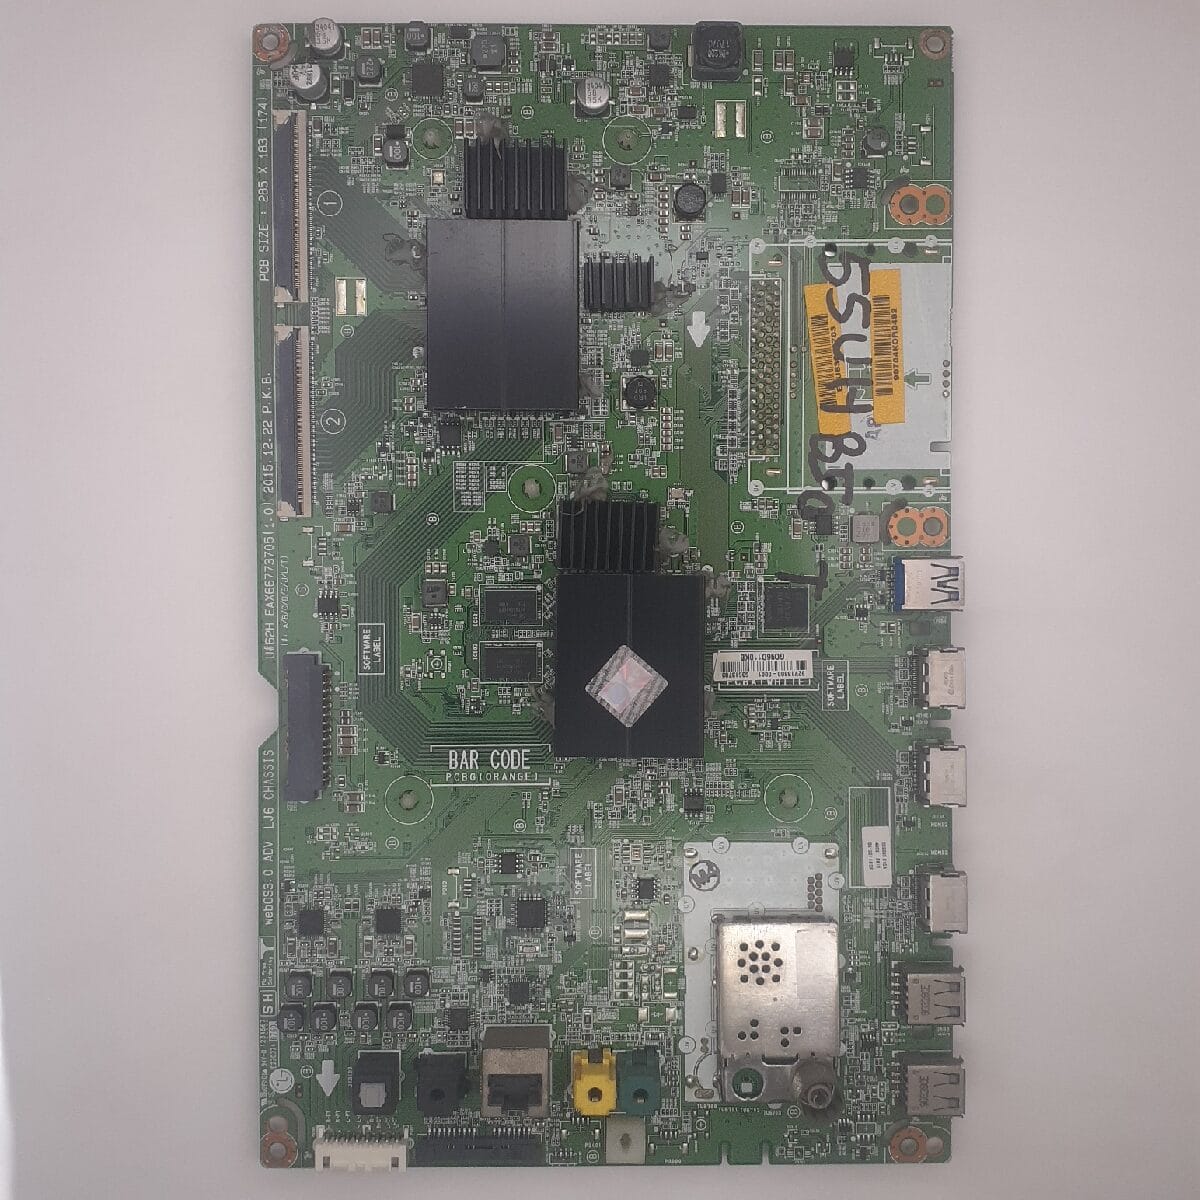 55UH850 T LG MOTHERBOARD FOR LED TV